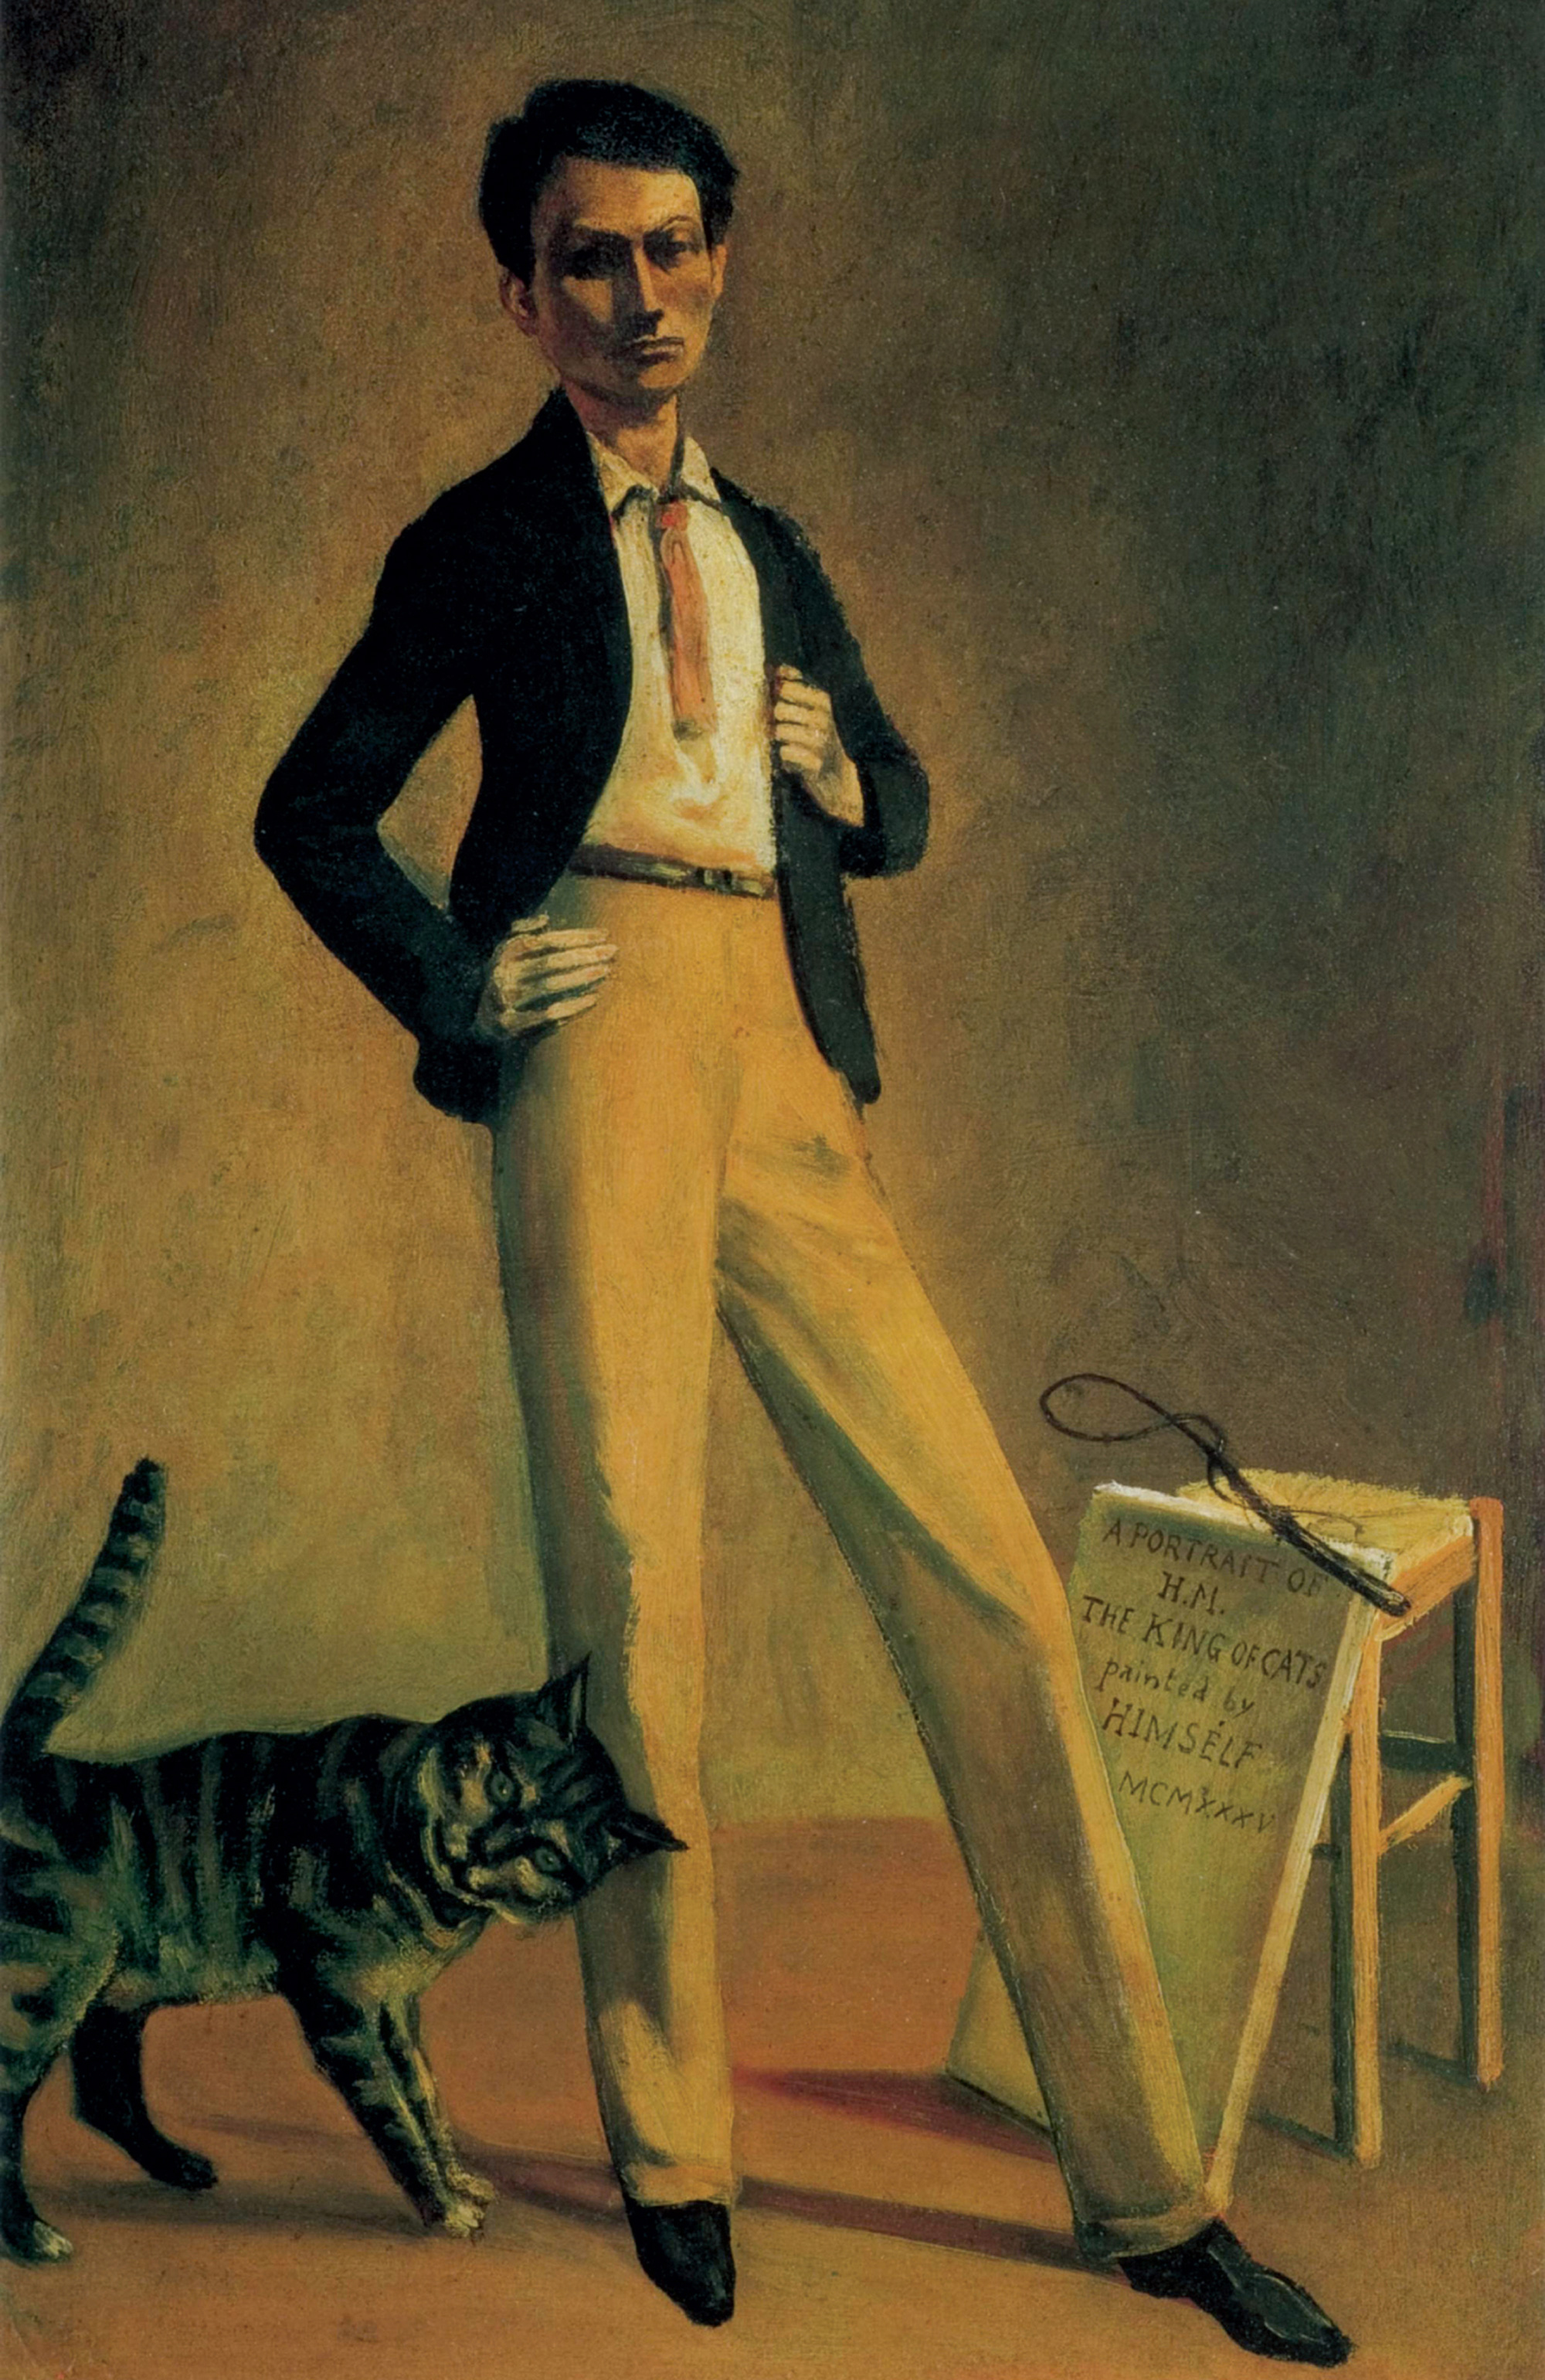 Balthus, The King of the Cats, 1935.